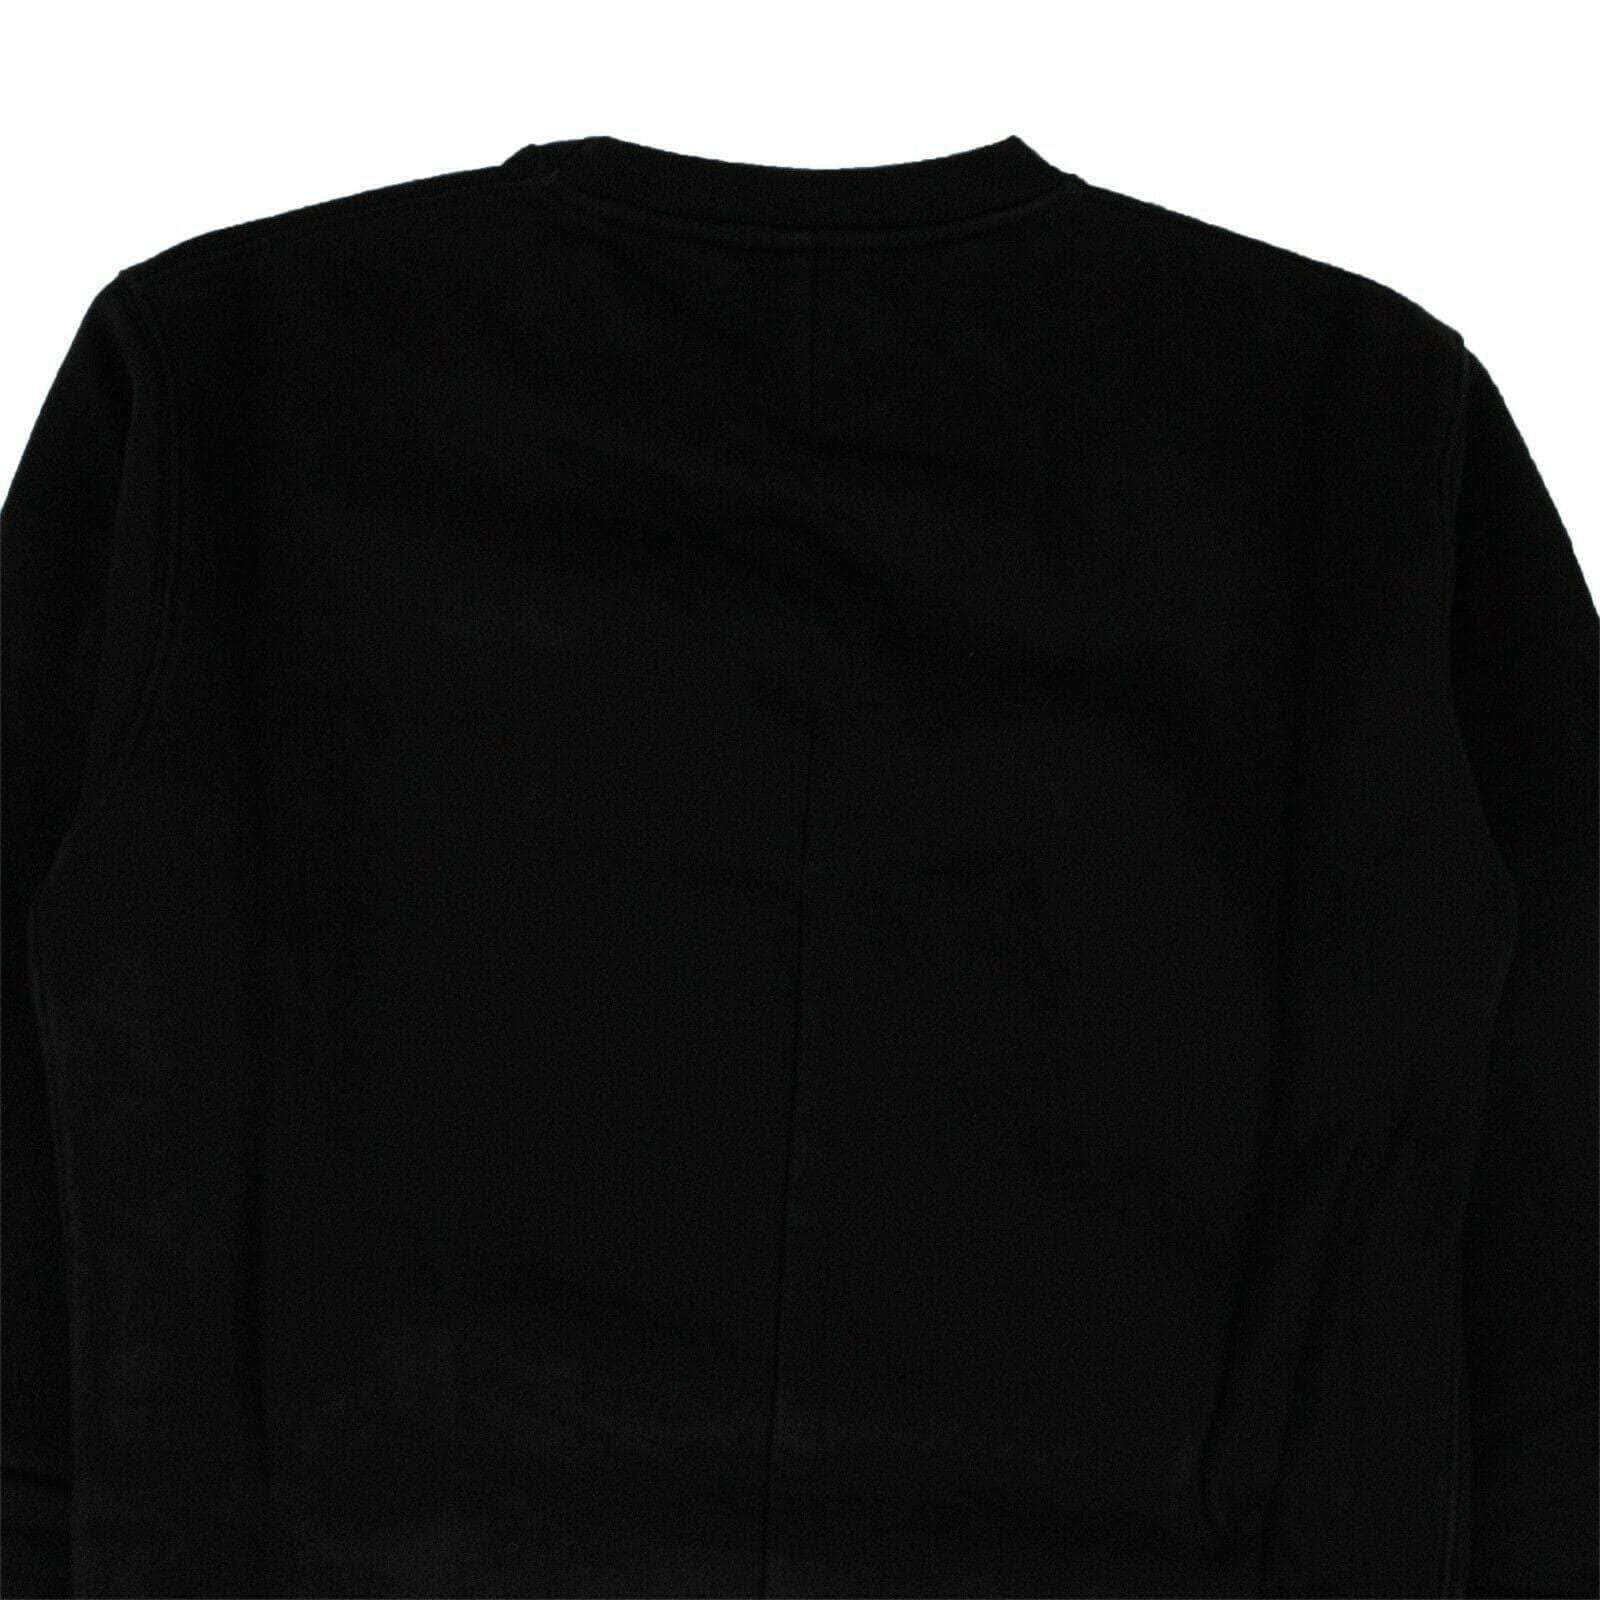 UNRAVEL PROJECT channelenable-all, couponcollection, gender-mens, main-clothing, mens-pullover-sweaters, size-l, size-m, size-s, under-250, unravel-project Black Cotton Slogan Print Longline Sweatshirt